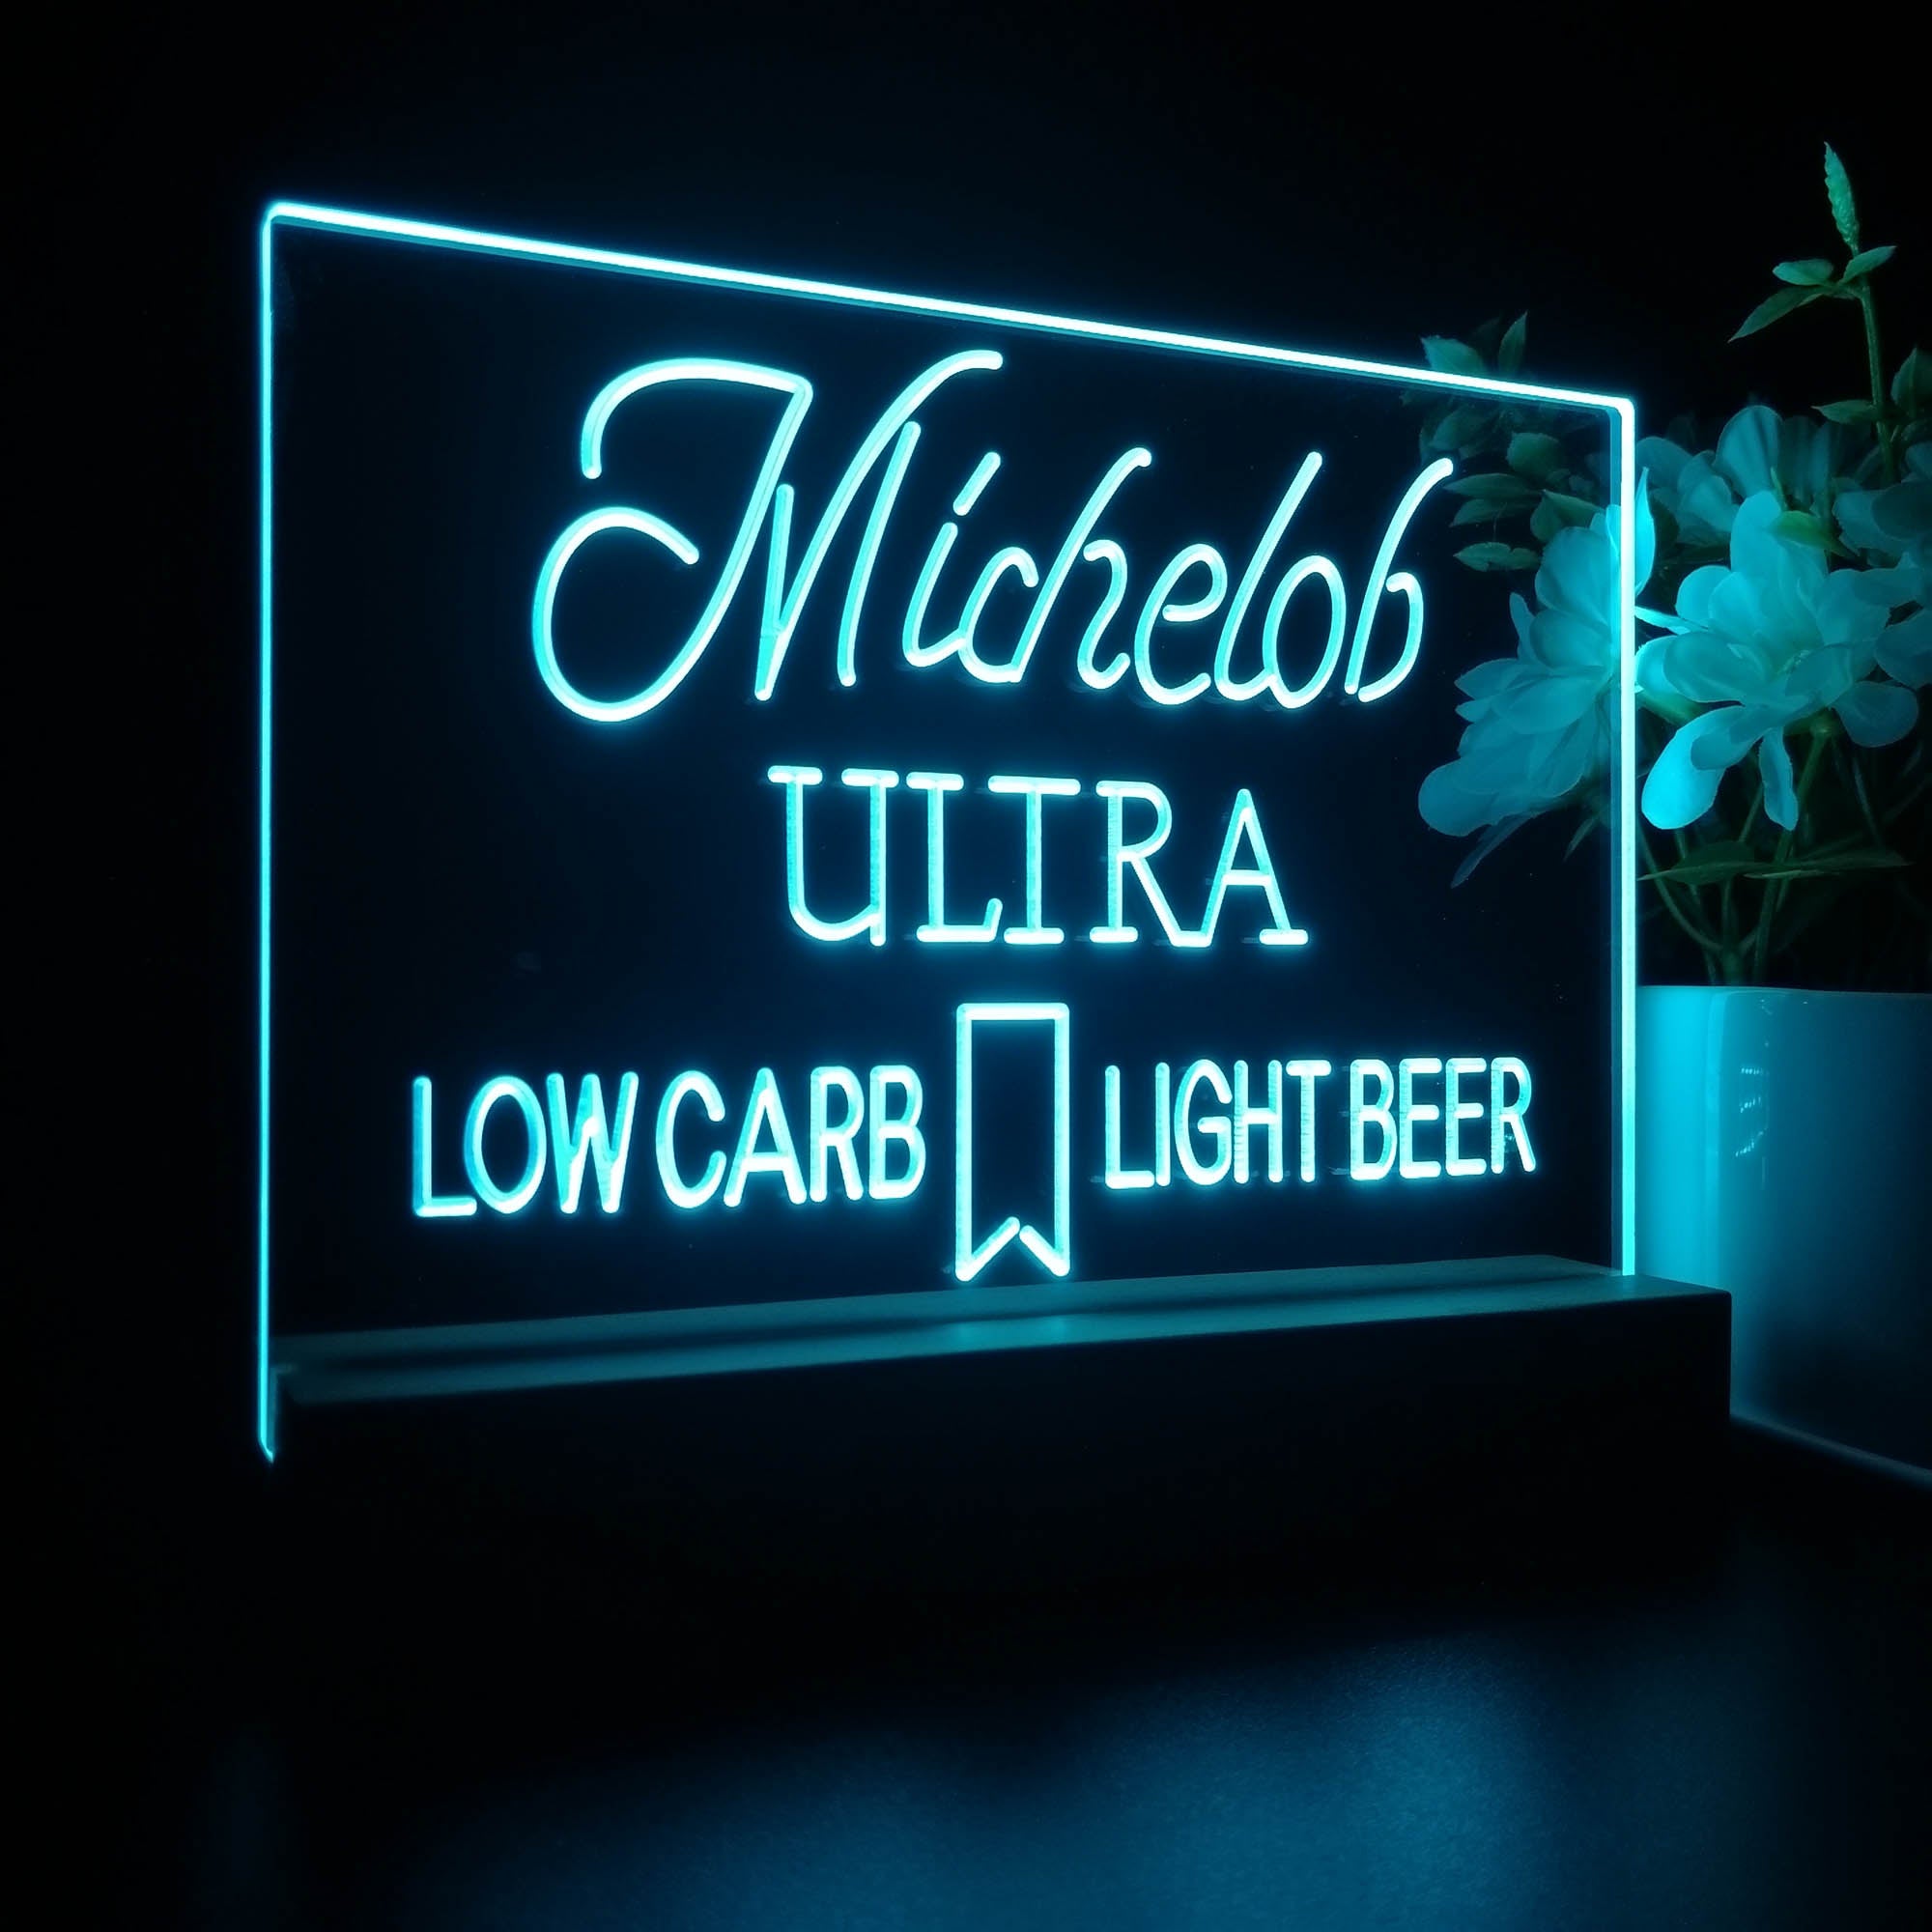 Michelob Ultra Low Carb Light Beer Night Light LED Sign